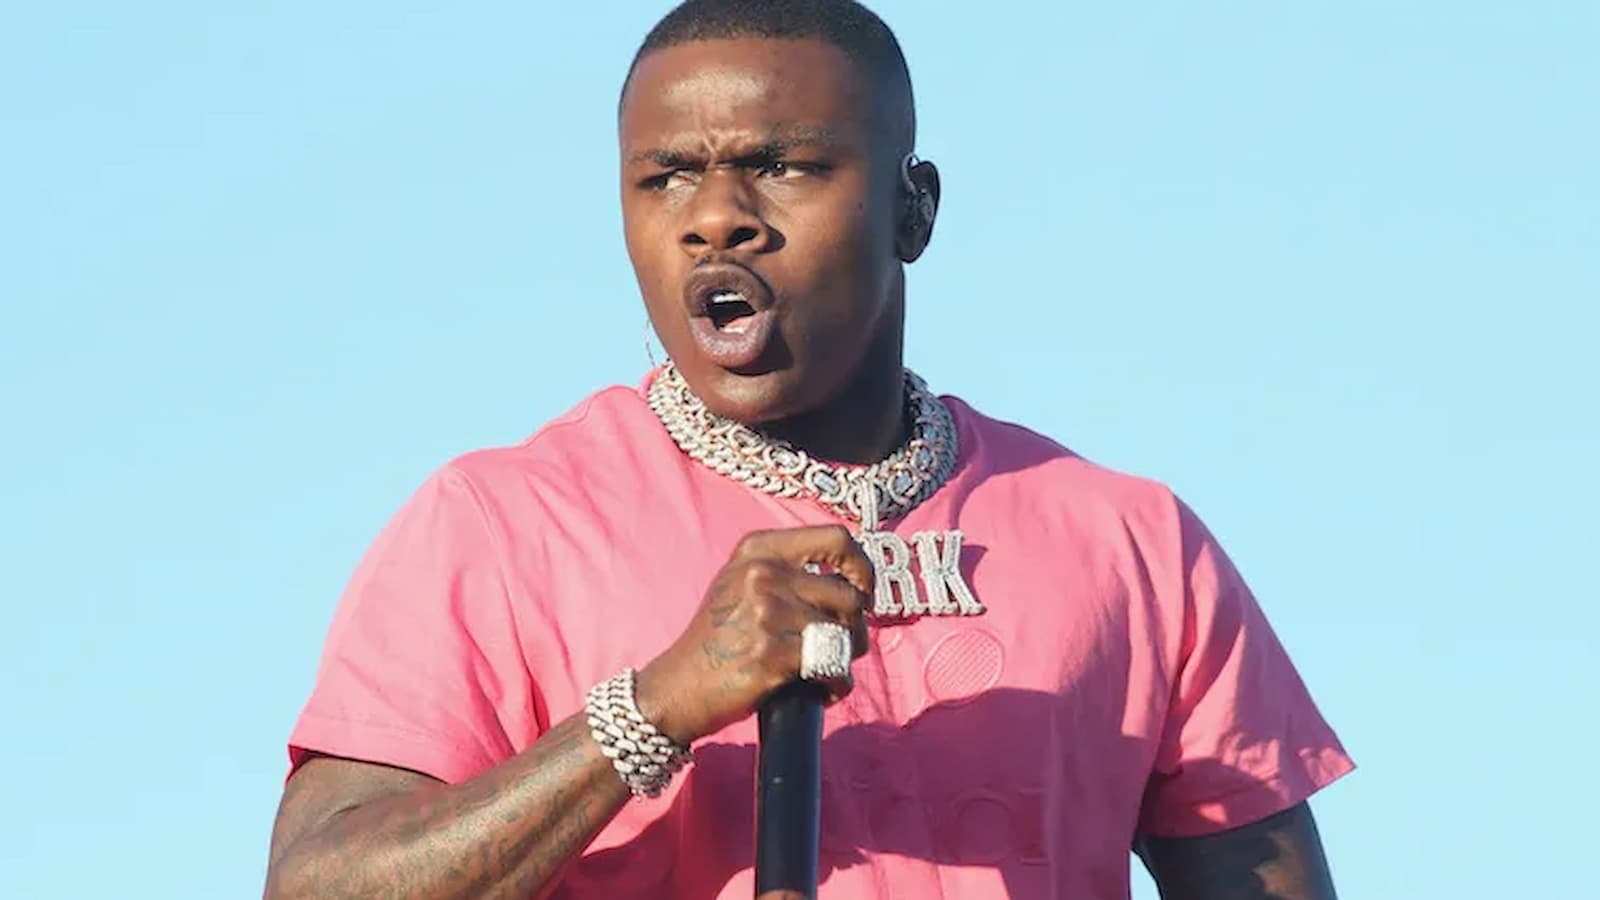 DaBaby Biography: Age, Height, Birthday, Career, Family, Personal Life, Net Worth